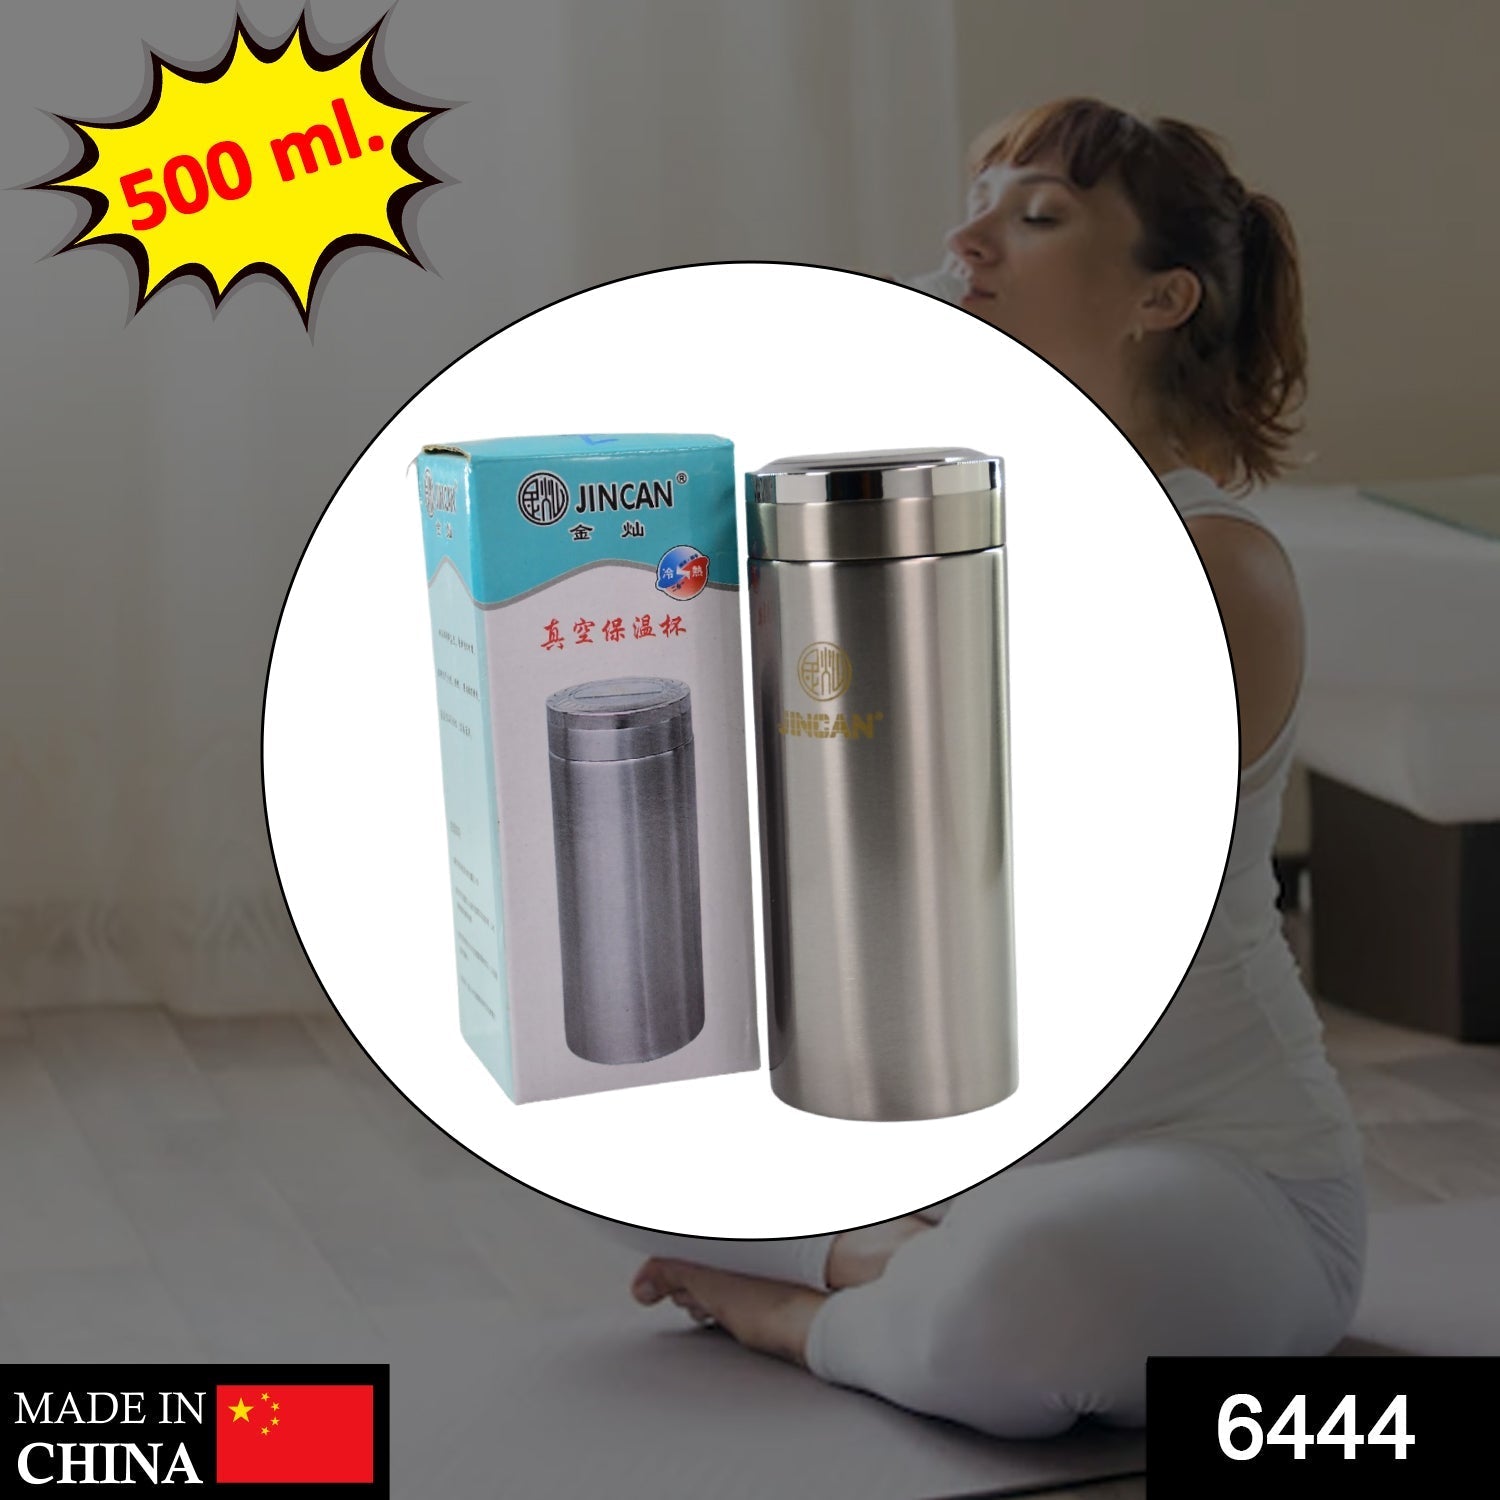 6444 500ML STAINLESS STEEL WATER BOTTLE FOR MEN WOMEN KIDS | THERMOS FLASK | REUSABLE LEAK-PROOF THERMOS STEEL FOR HOME OFFICE GYM FRIDGE TRAVELLING 